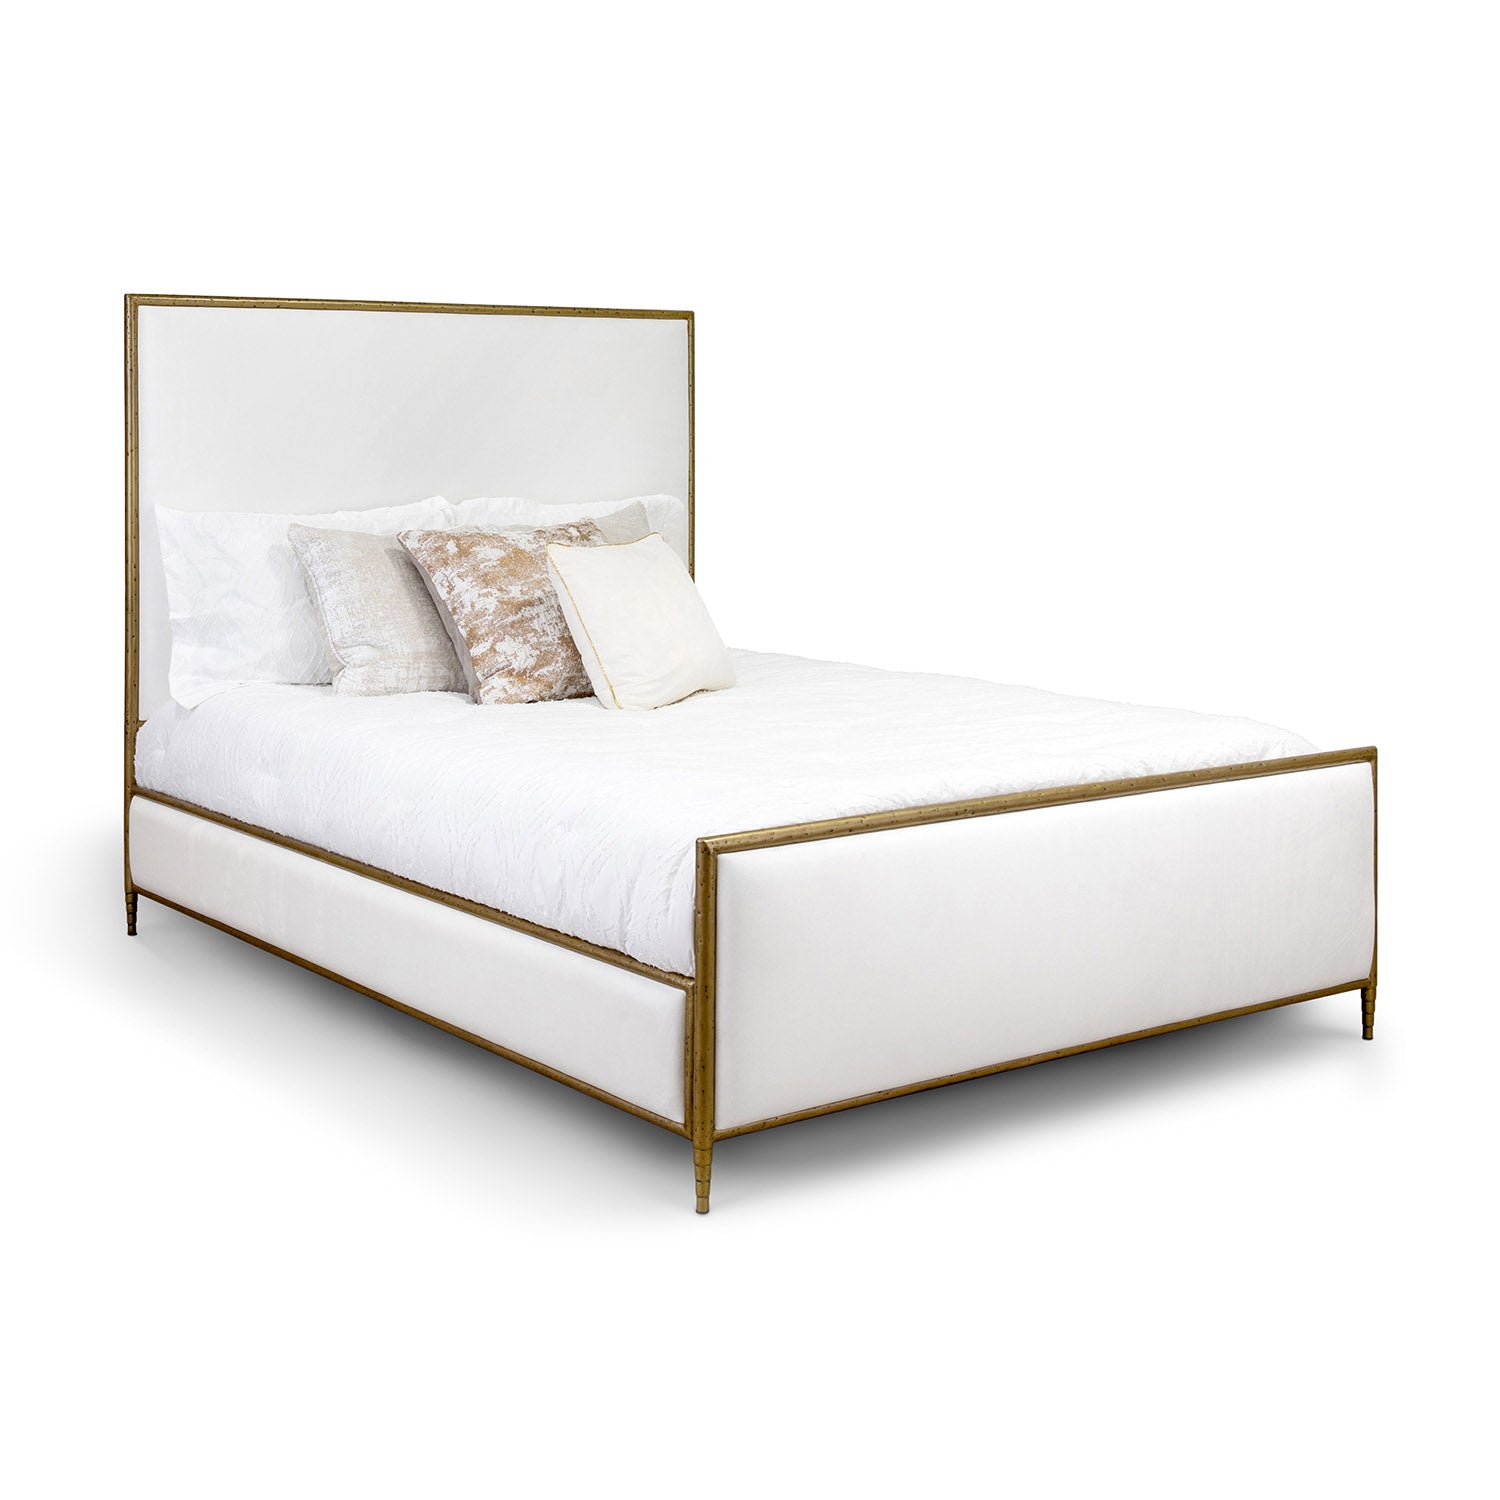 Royce Upholstered Iron Bed in Royal White Fabric and Hammered Brass Finish by Wesley Allen